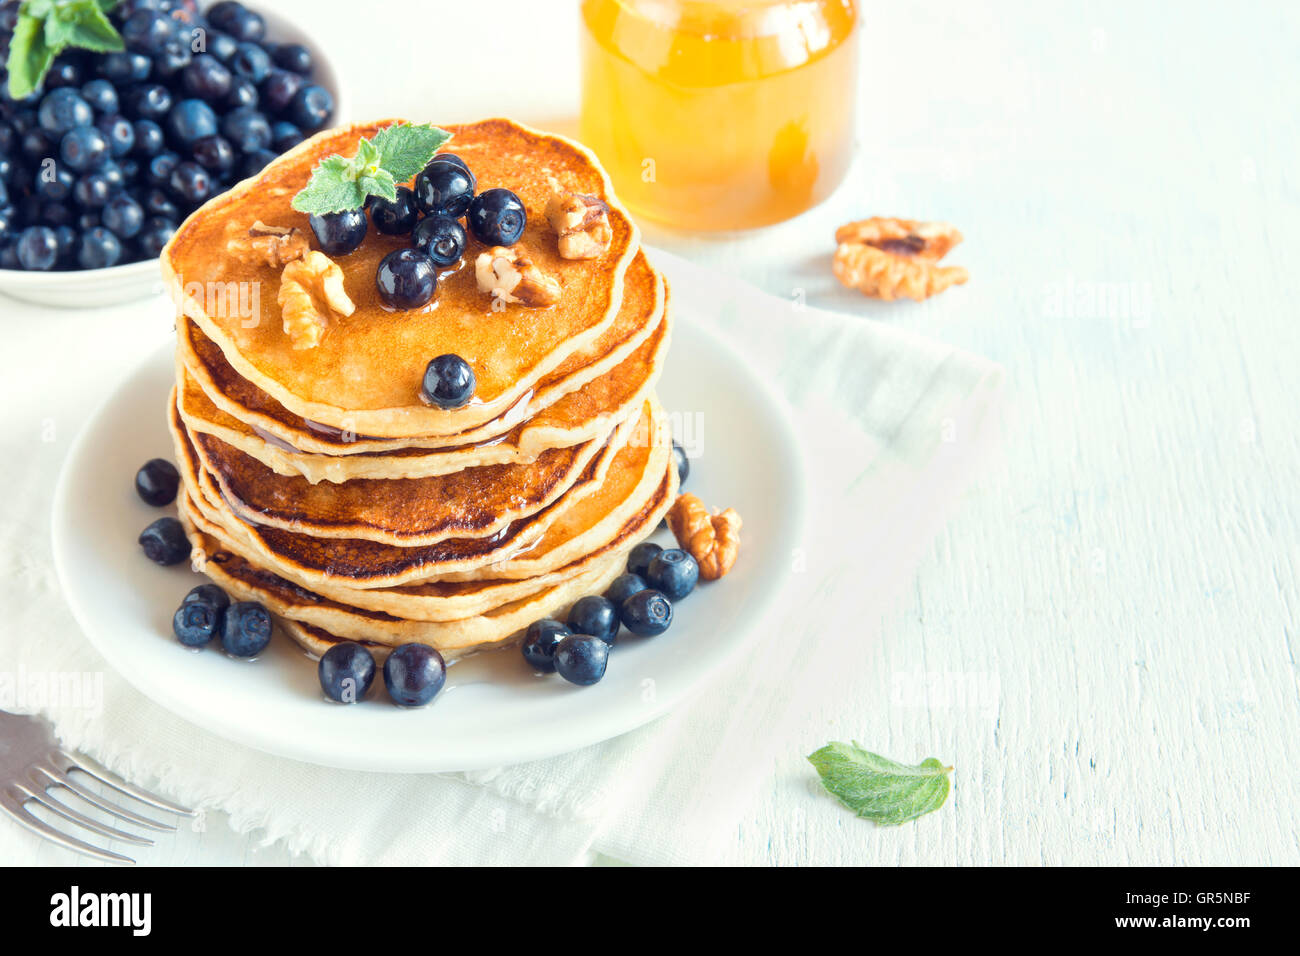 Homemade pancakes with blueberry, honey and walnuts for breakfast Stock Photo